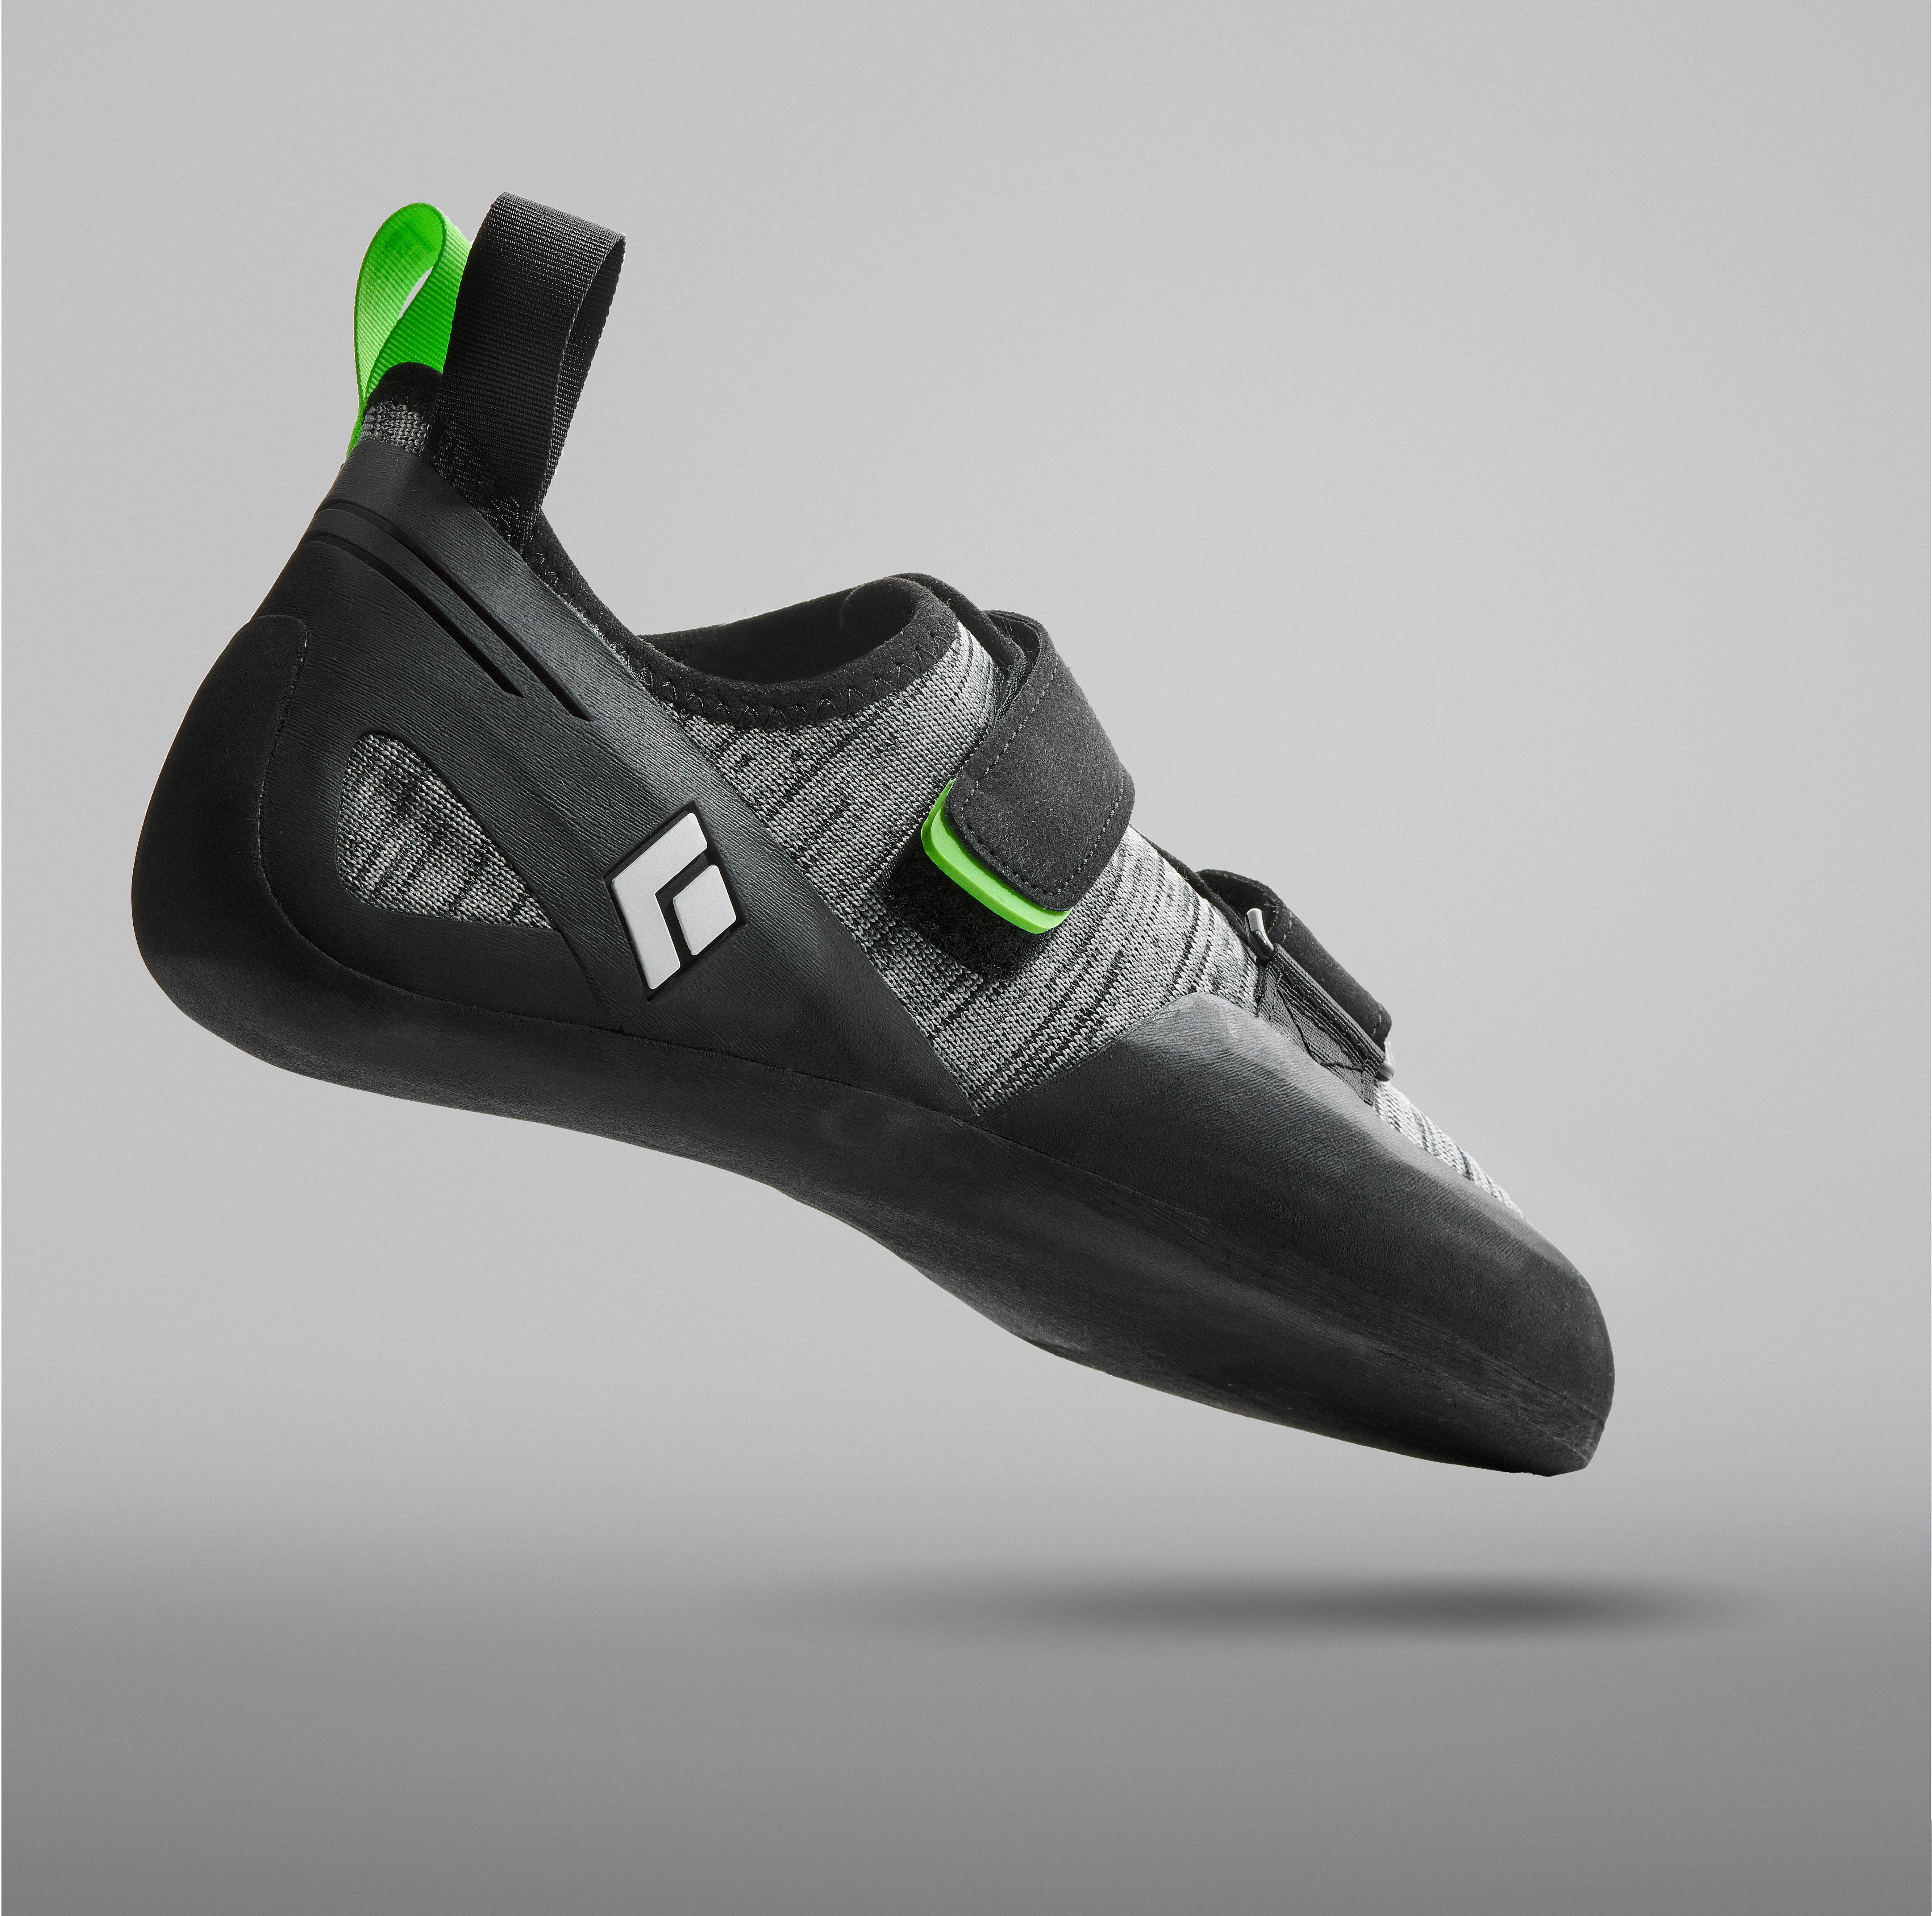 A glam shot of the side of the Momentum Climbing Shoe.